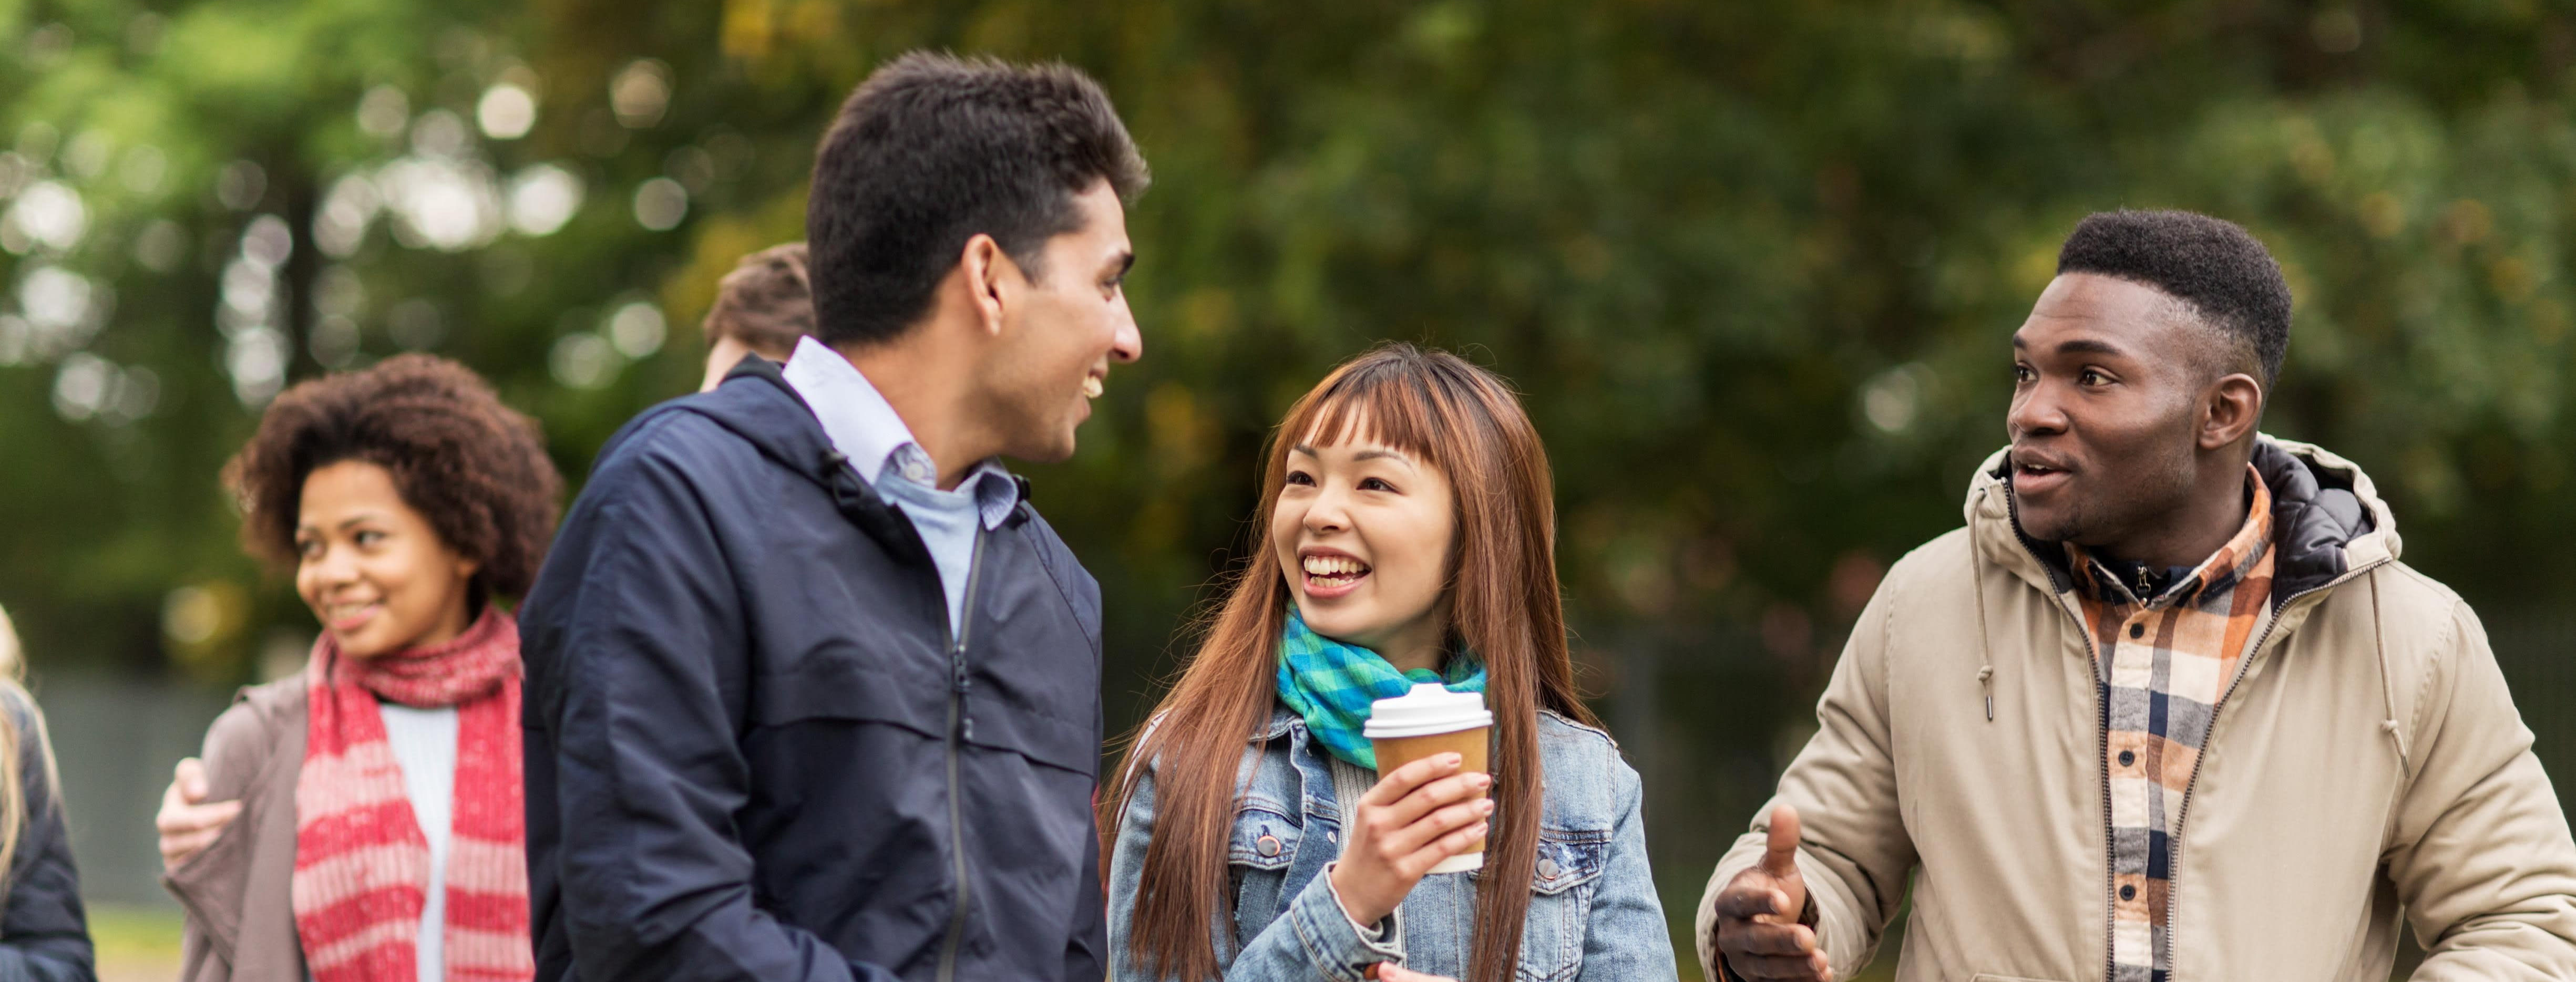 What International Students Should Look For on a Campus Visit